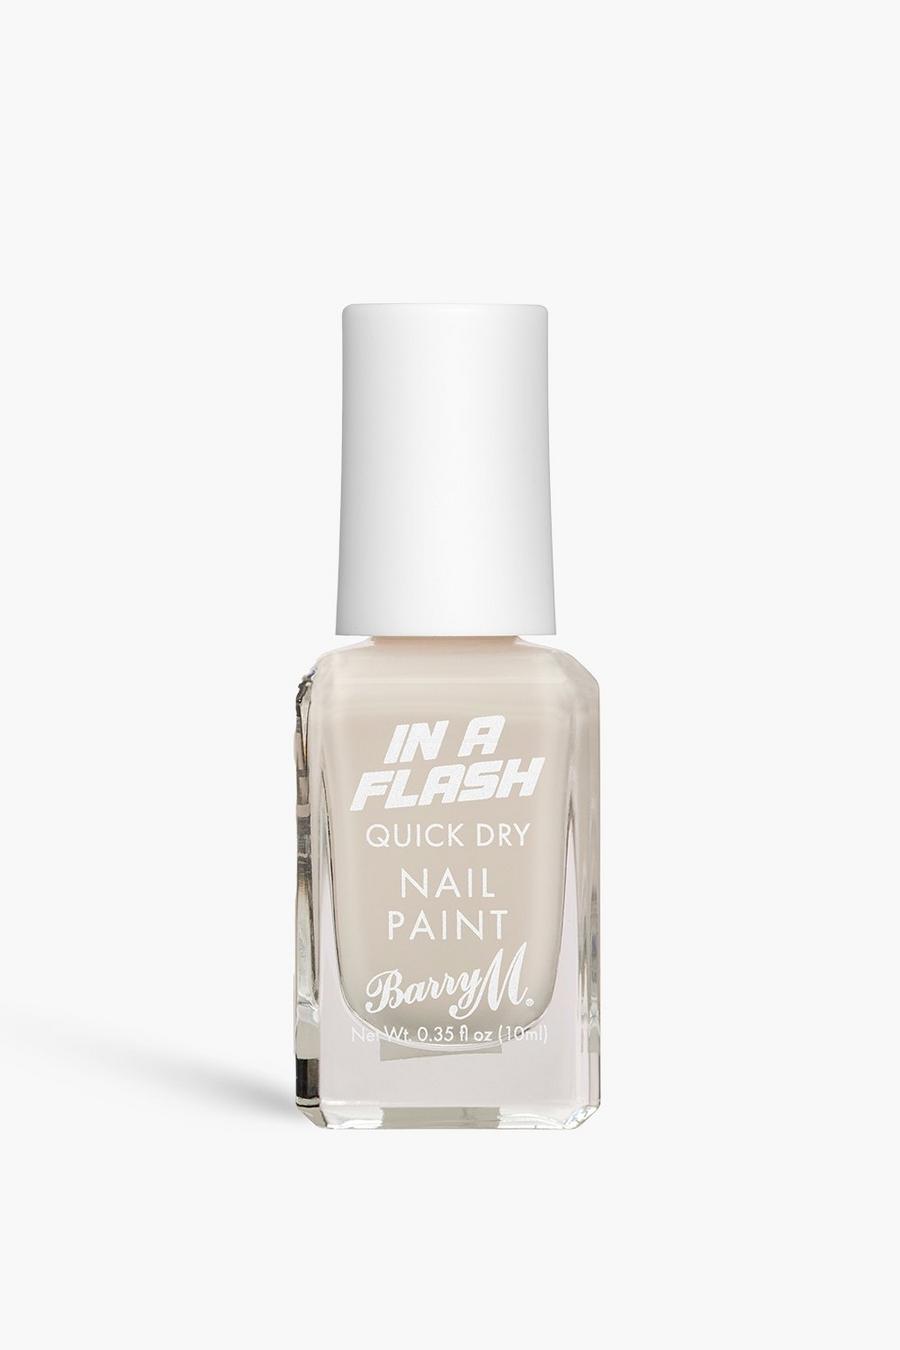 Cream white Barry M In A Flash Quick Dry Nail Paint